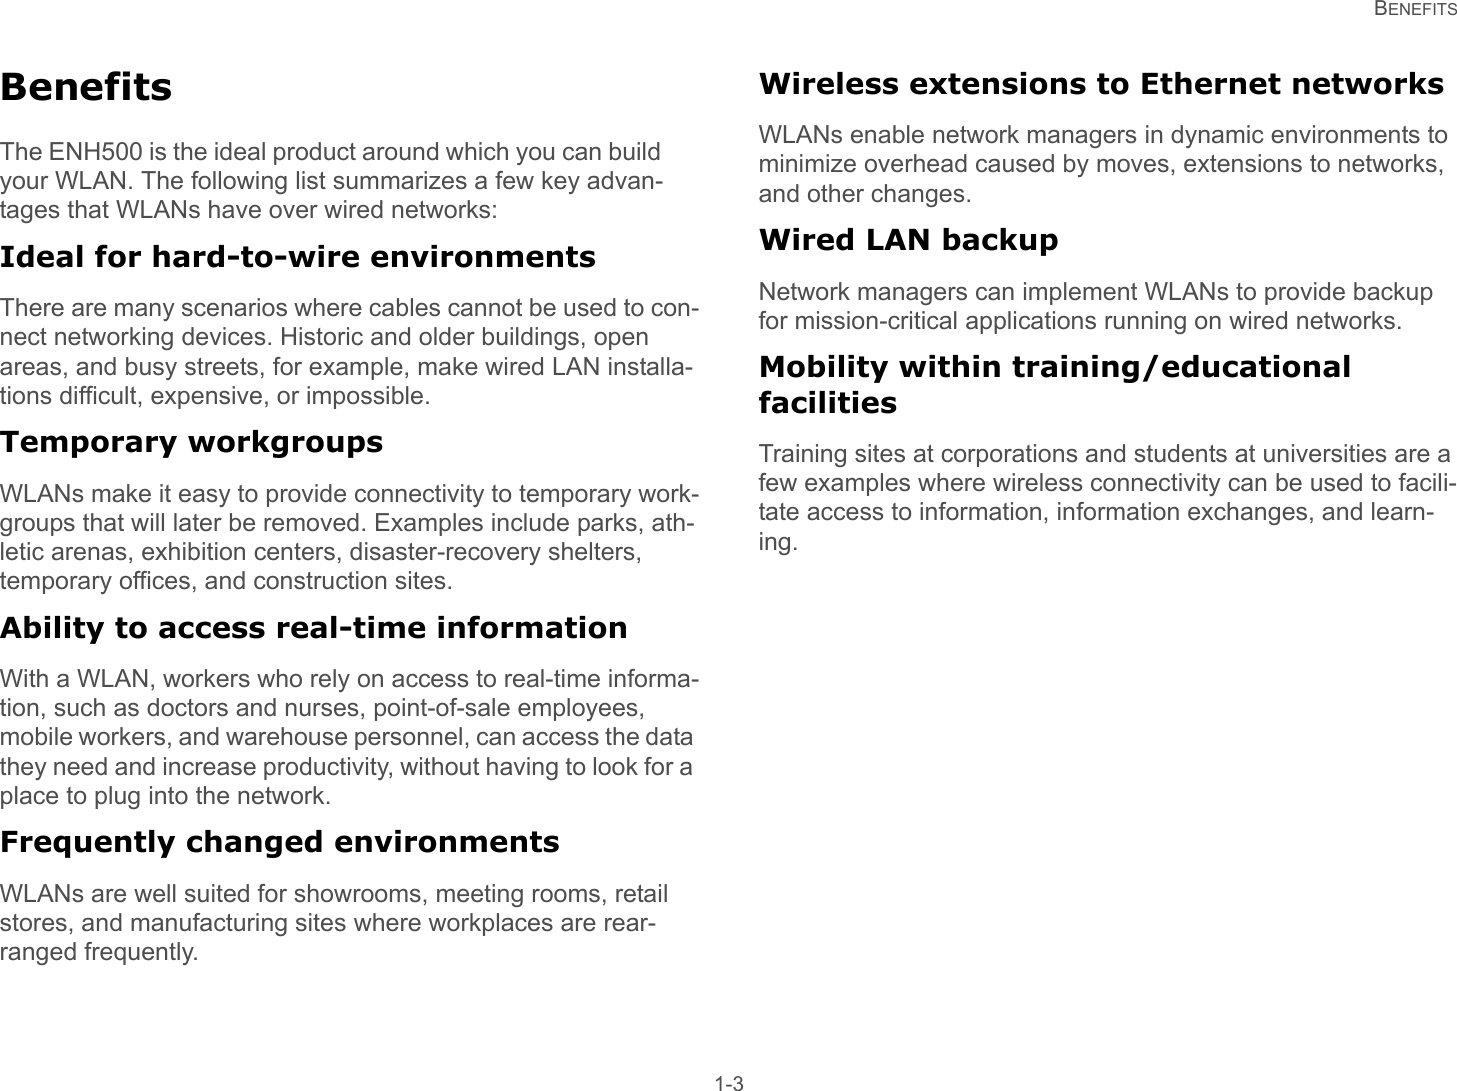   BENEFITS 1-3BenefitsThe ENH500 is the ideal product around which you can build your WLAN. The following list summarizes a few key advan-tages that WLANs have over wired networks:Ideal for hard-to-wire environmentsThere are many scenarios where cables cannot be used to con-nect networking devices. Historic and older buildings, open areas, and busy streets, for example, make wired LAN installa-tions difficult, expensive, or impossible.Temporary workgroupsWLANs make it easy to provide connectivity to temporary work-groups that will later be removed. Examples include parks, ath-letic arenas, exhibition centers, disaster-recovery shelters, temporary offices, and construction sites.Ability to access real-time informationWith a WLAN, workers who rely on access to real-time informa-tion, such as doctors and nurses, point-of-sale employees, mobile workers, and warehouse personnel, can access the data they need and increase productivity, without having to look for a place to plug into the network.Frequently changed environmentsWLANs are well suited for showrooms, meeting rooms, retail stores, and manufacturing sites where workplaces are rear-ranged frequently.Wireless extensions to Ethernet networksWLANs enable network managers in dynamic environments to minimize overhead caused by moves, extensions to networks, and other changes.Wired LAN backupNetwork managers can implement WLANs to provide backup for mission-critical applications running on wired networks.Mobility within training/educational facilitiesTraining sites at corporations and students at universities are a few examples where wireless connectivity can be used to facili-tate access to information, information exchanges, and learn-ing.